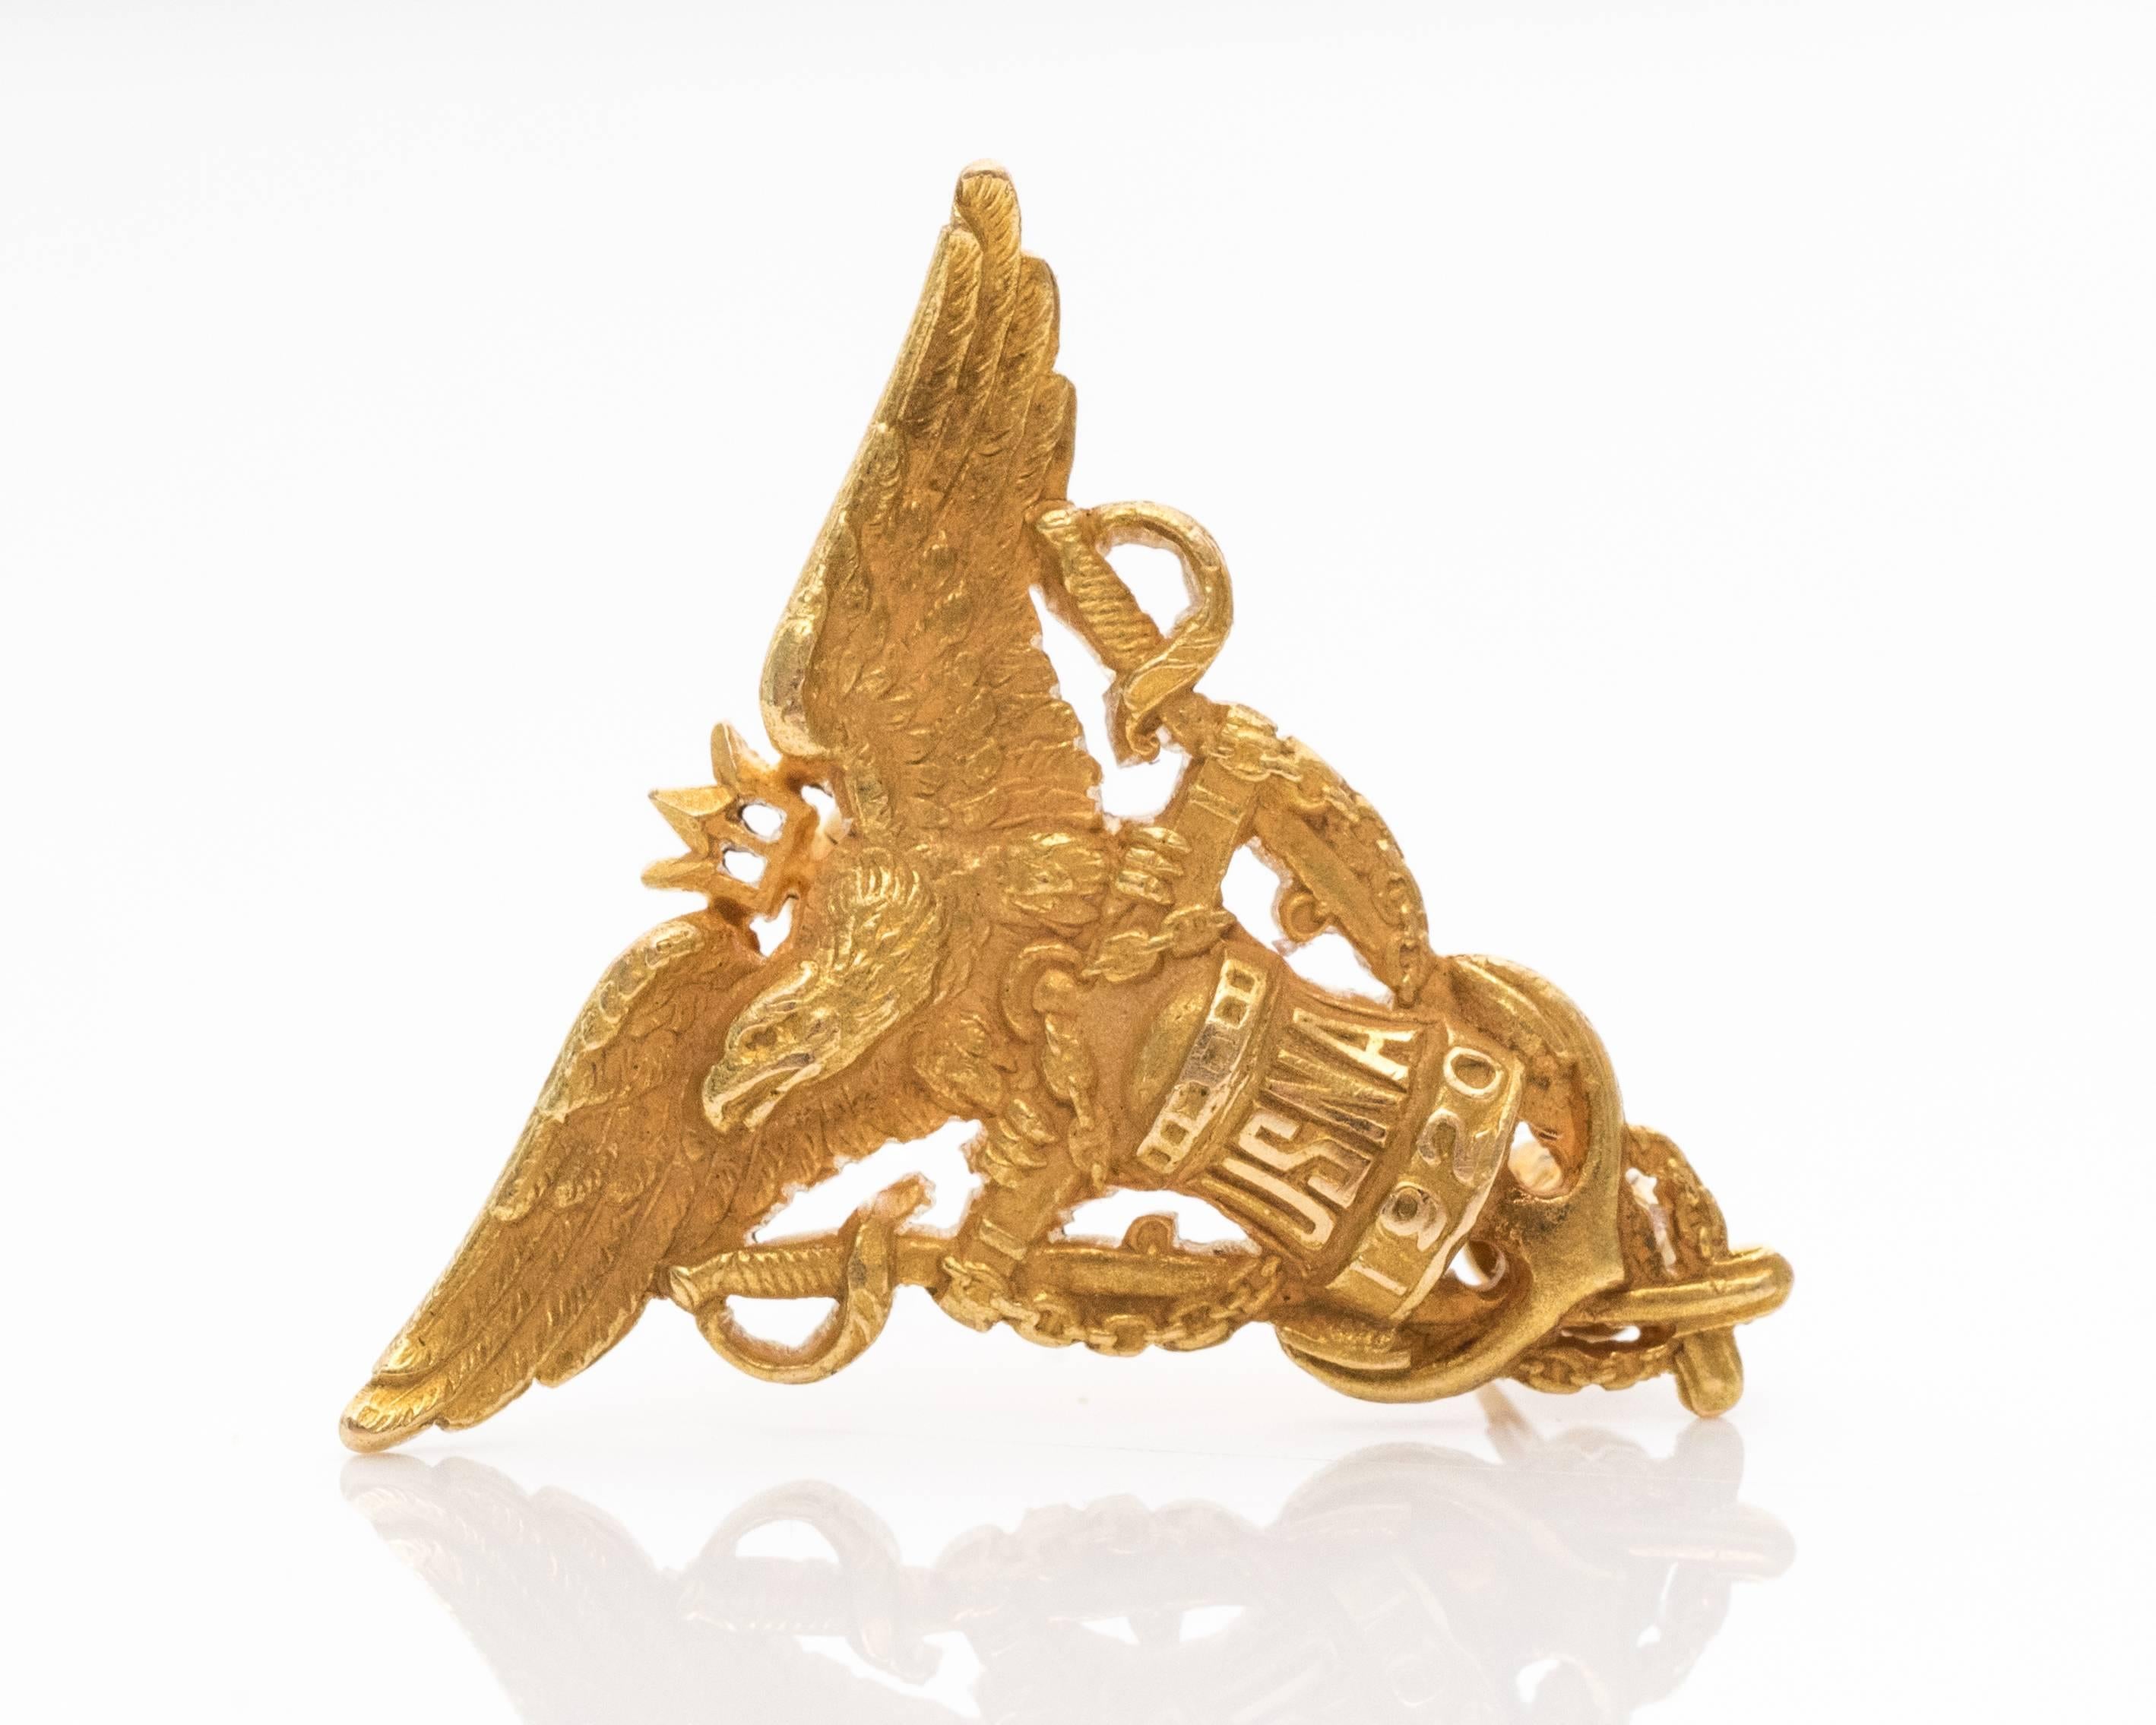 This is an authentic US Navy pin from 1920s. The hallmark USNA 1920 is written on the front underneath the eagle. The backside has the original soldier's initials HEP. The pin was sold by the jeweler Bailey Banks and Biddle so the hallmark BB&B 14K